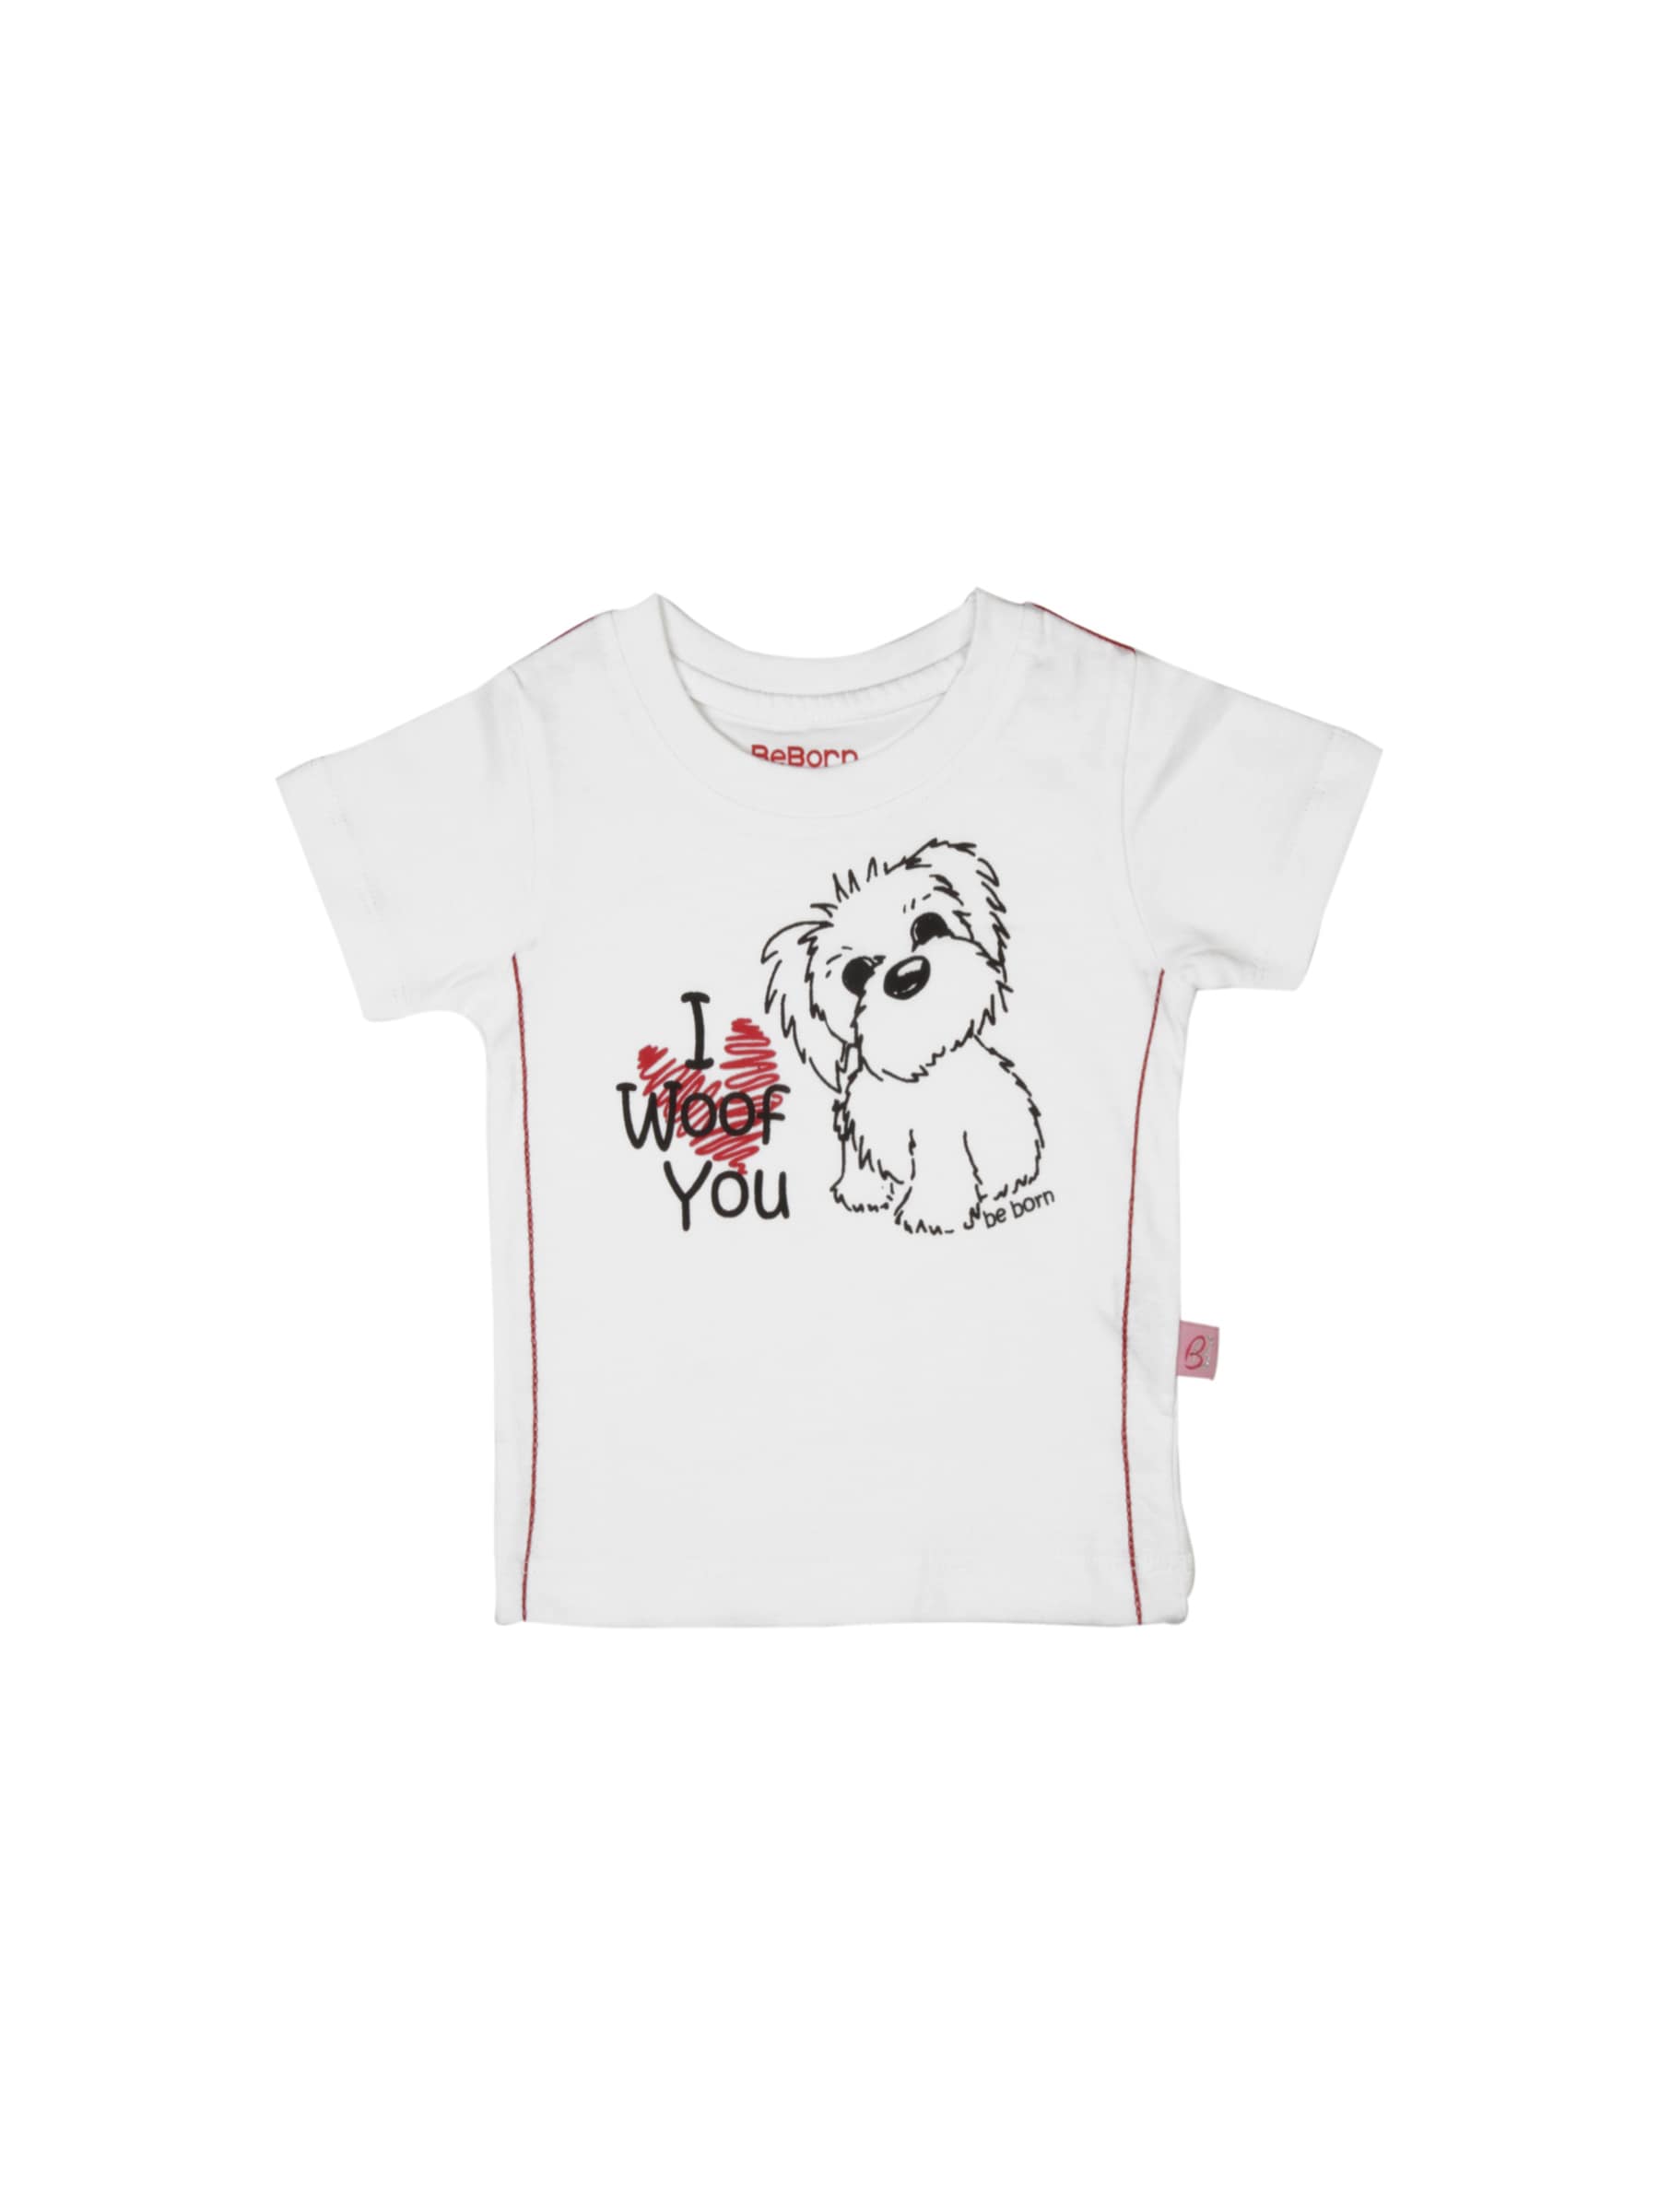 Doodle Boys Printed White T-shirt